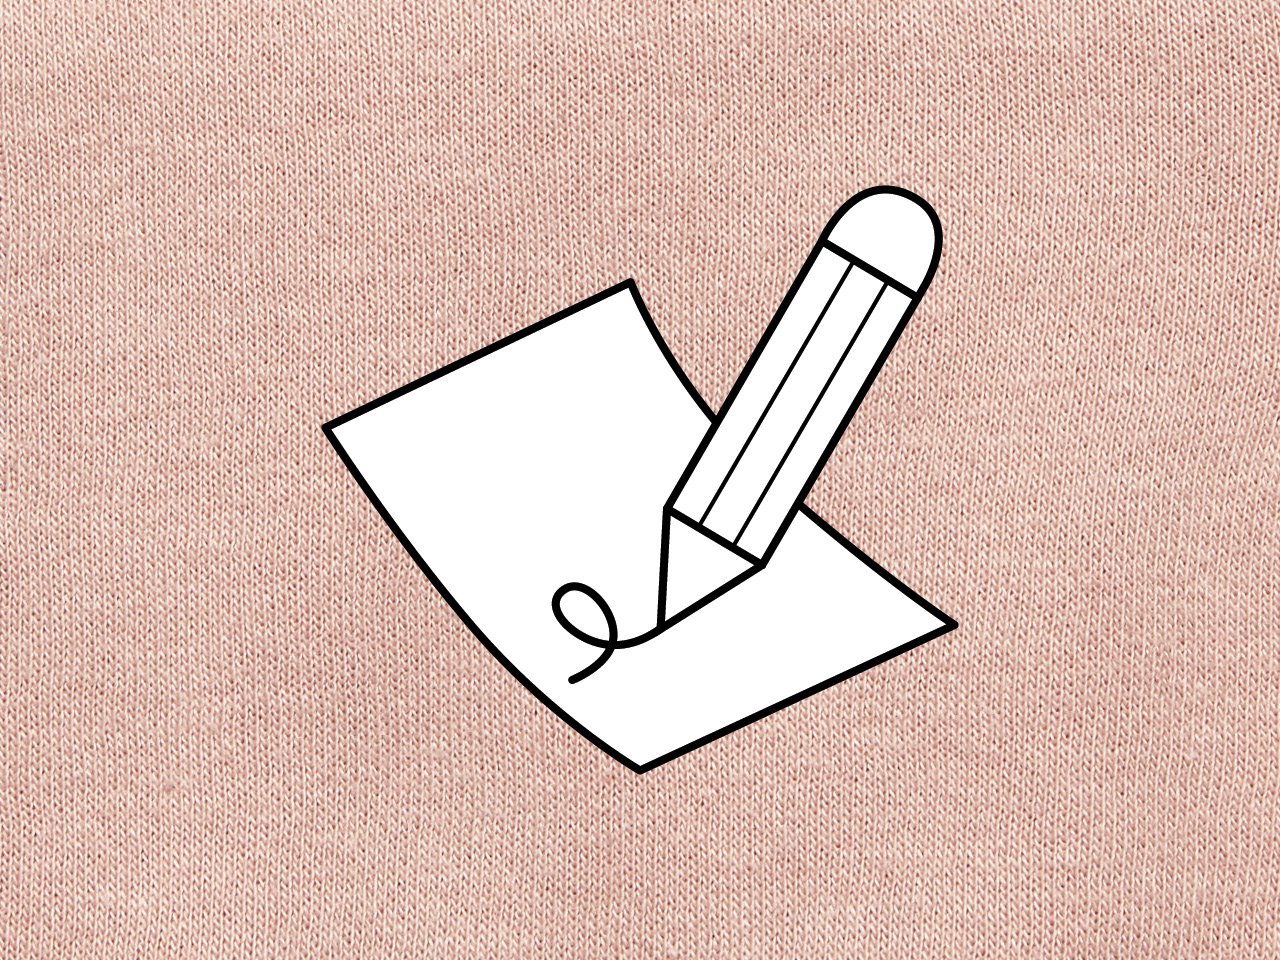 An illustration of a pencil and paper on a pink cloth background